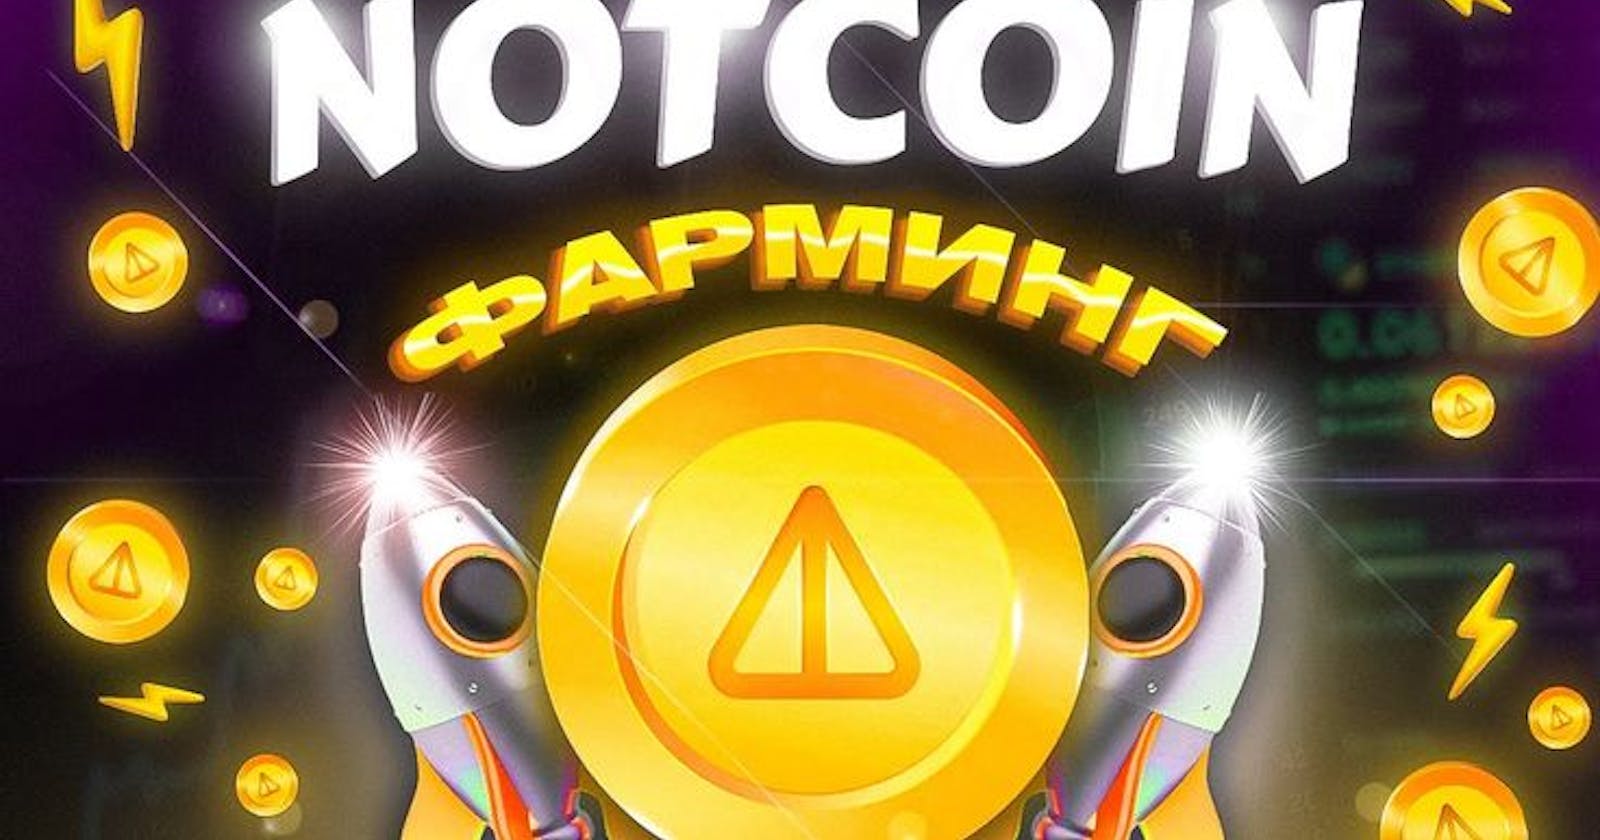 Notcoin: Clicker Game or Risky Investment?